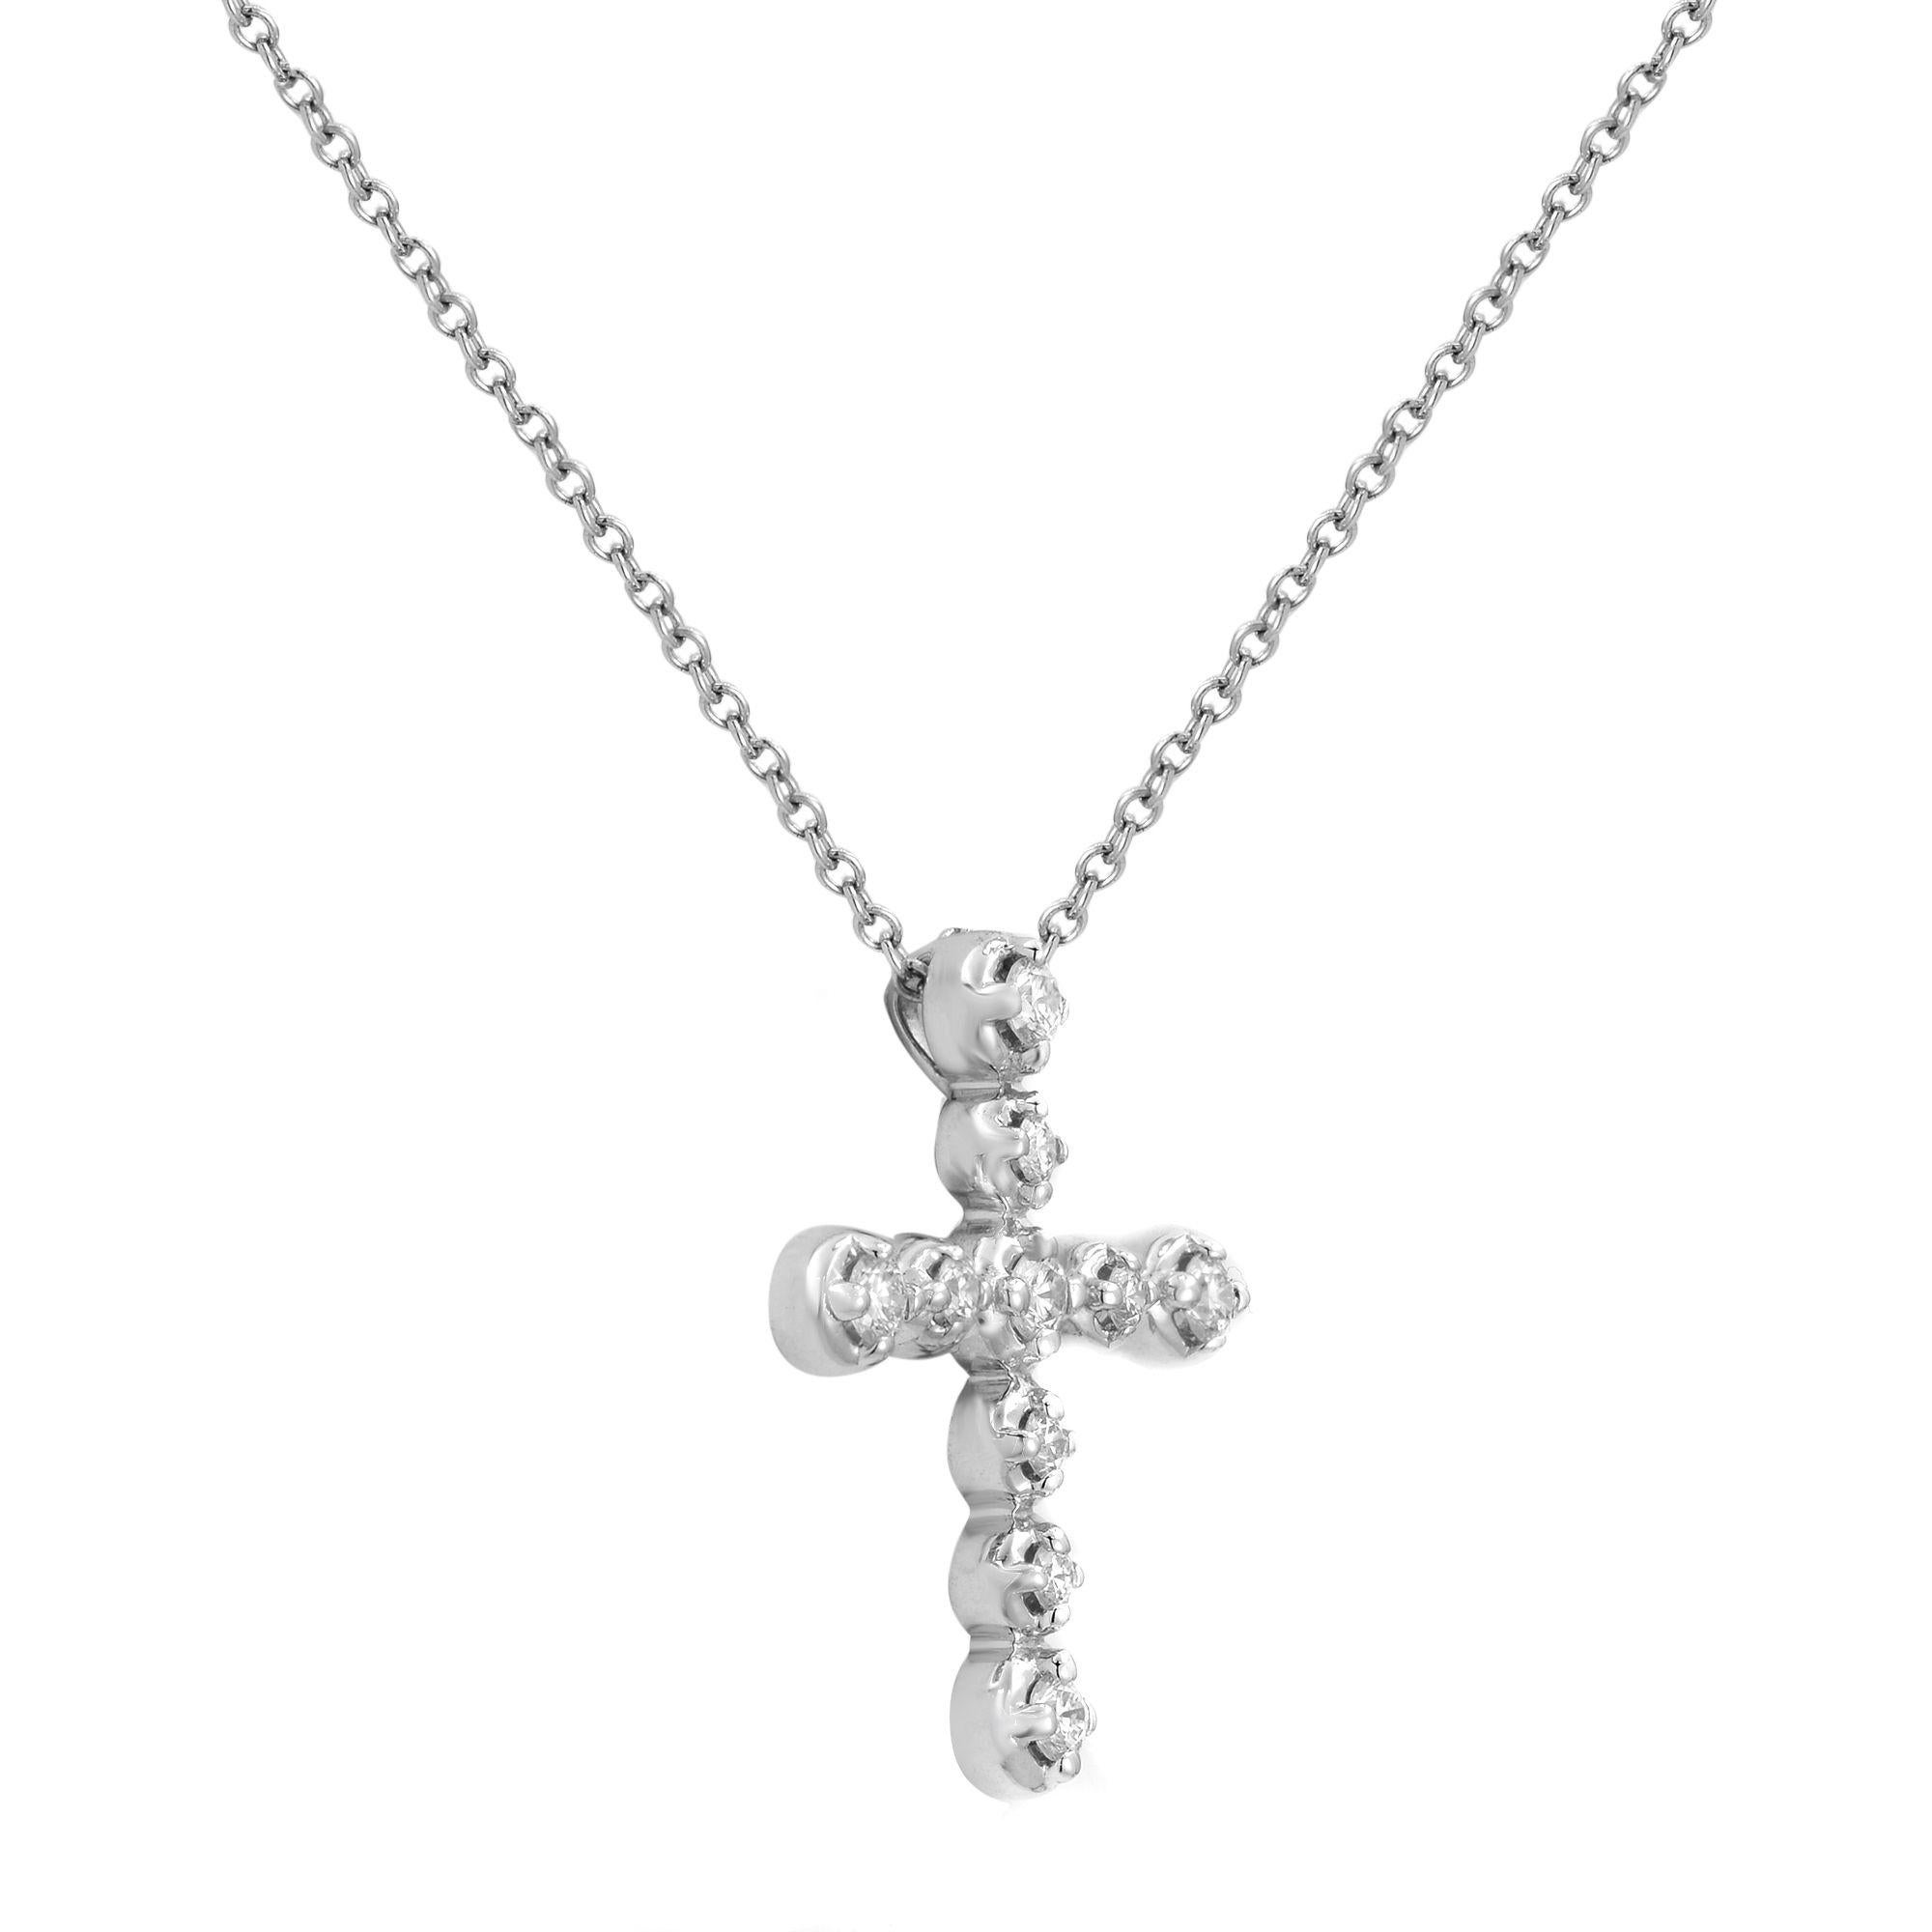 This is a gorgeous authentic cross pendant from Tiffany & Co. from Paloma Picasso collection. It is crafted from 18k white gold with a polished finish and features a lovely prong set round cut sparkling diamonds. Total carat weight, 0.30. Chain